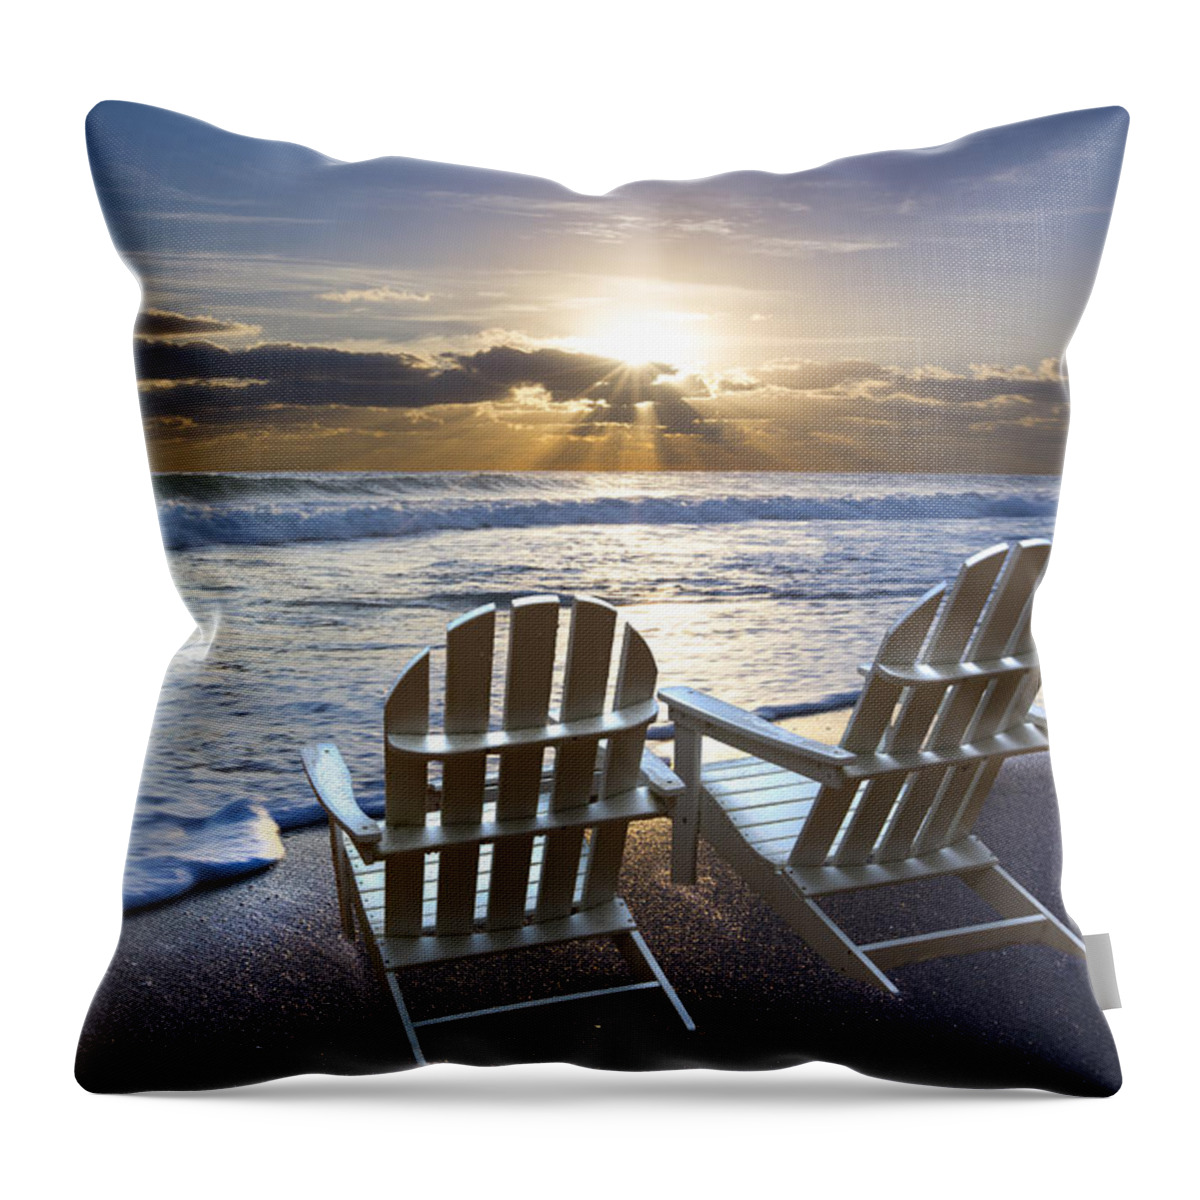 Clouds Throw Pillow featuring the photograph Beach Chairs by Debra and Dave Vanderlaan